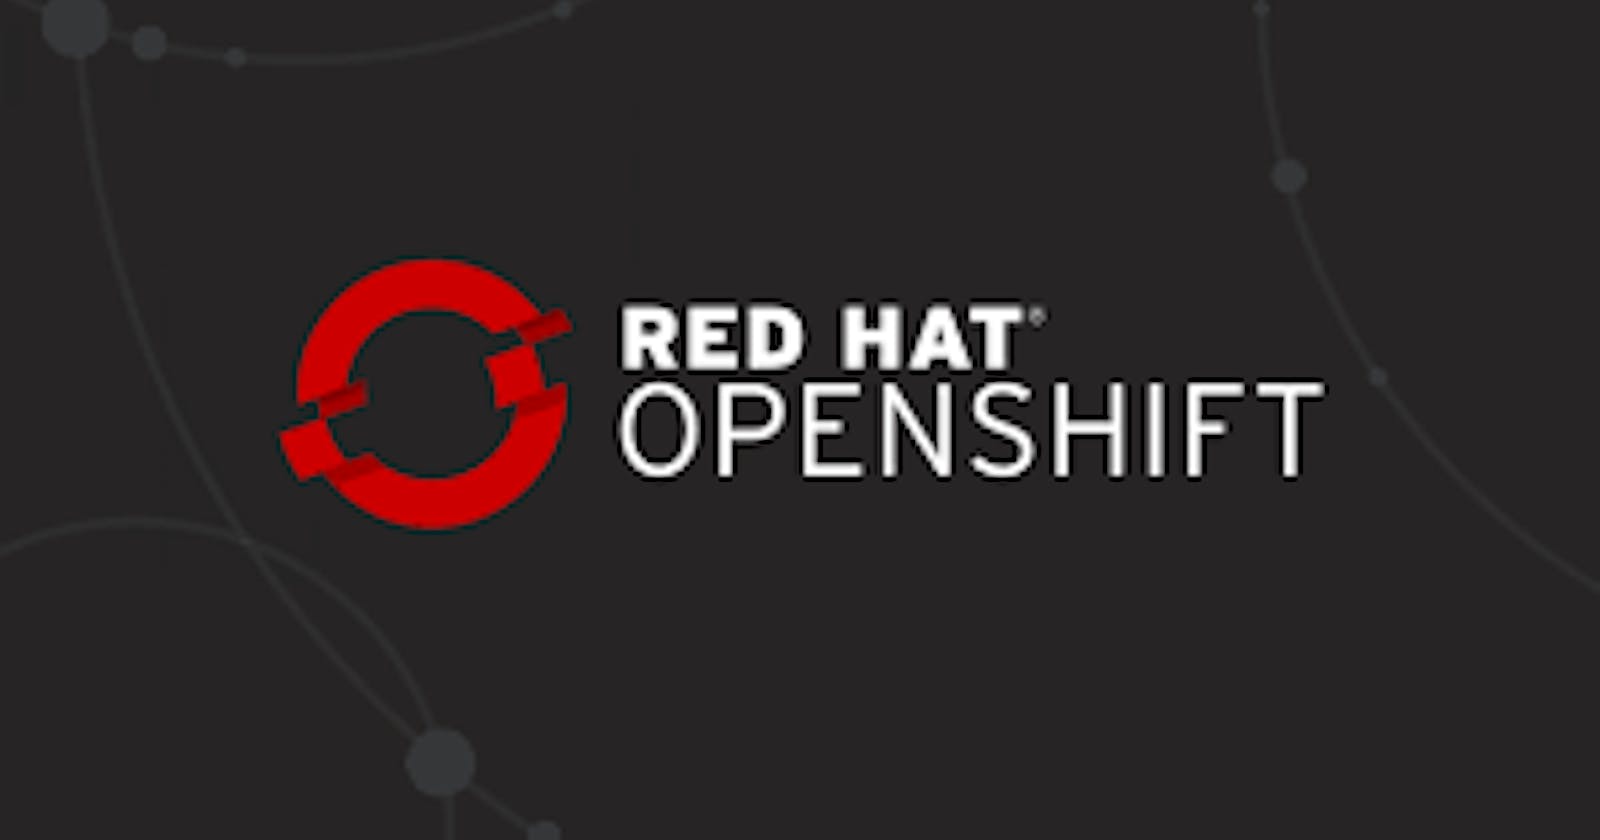 Getting started with OpenShift - The container orchestration platform